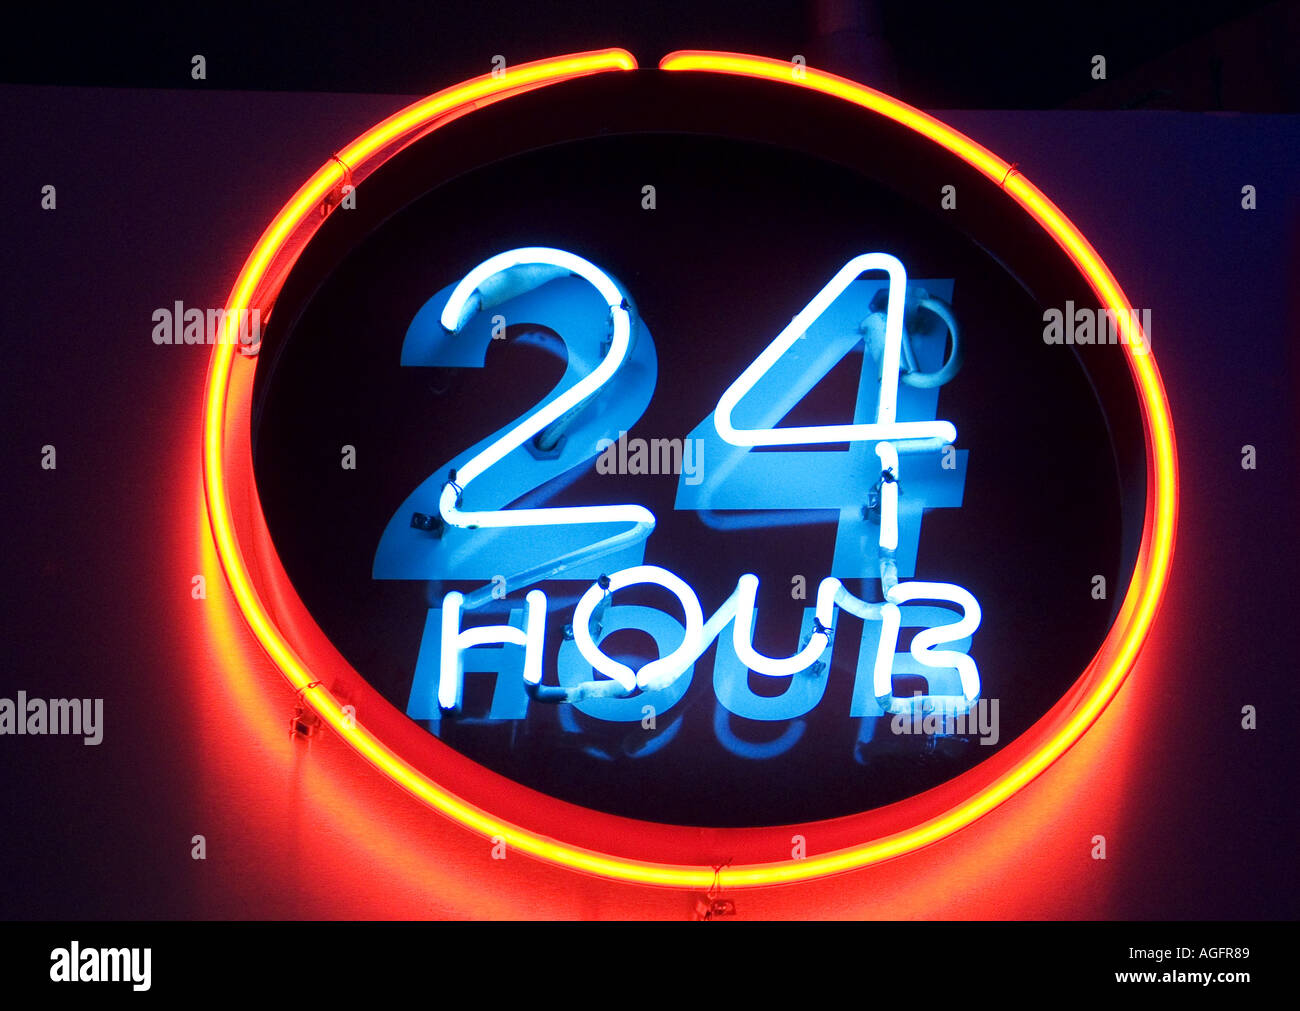 Neon 24 Hour sign in Las Vegas Airport Stock Photo